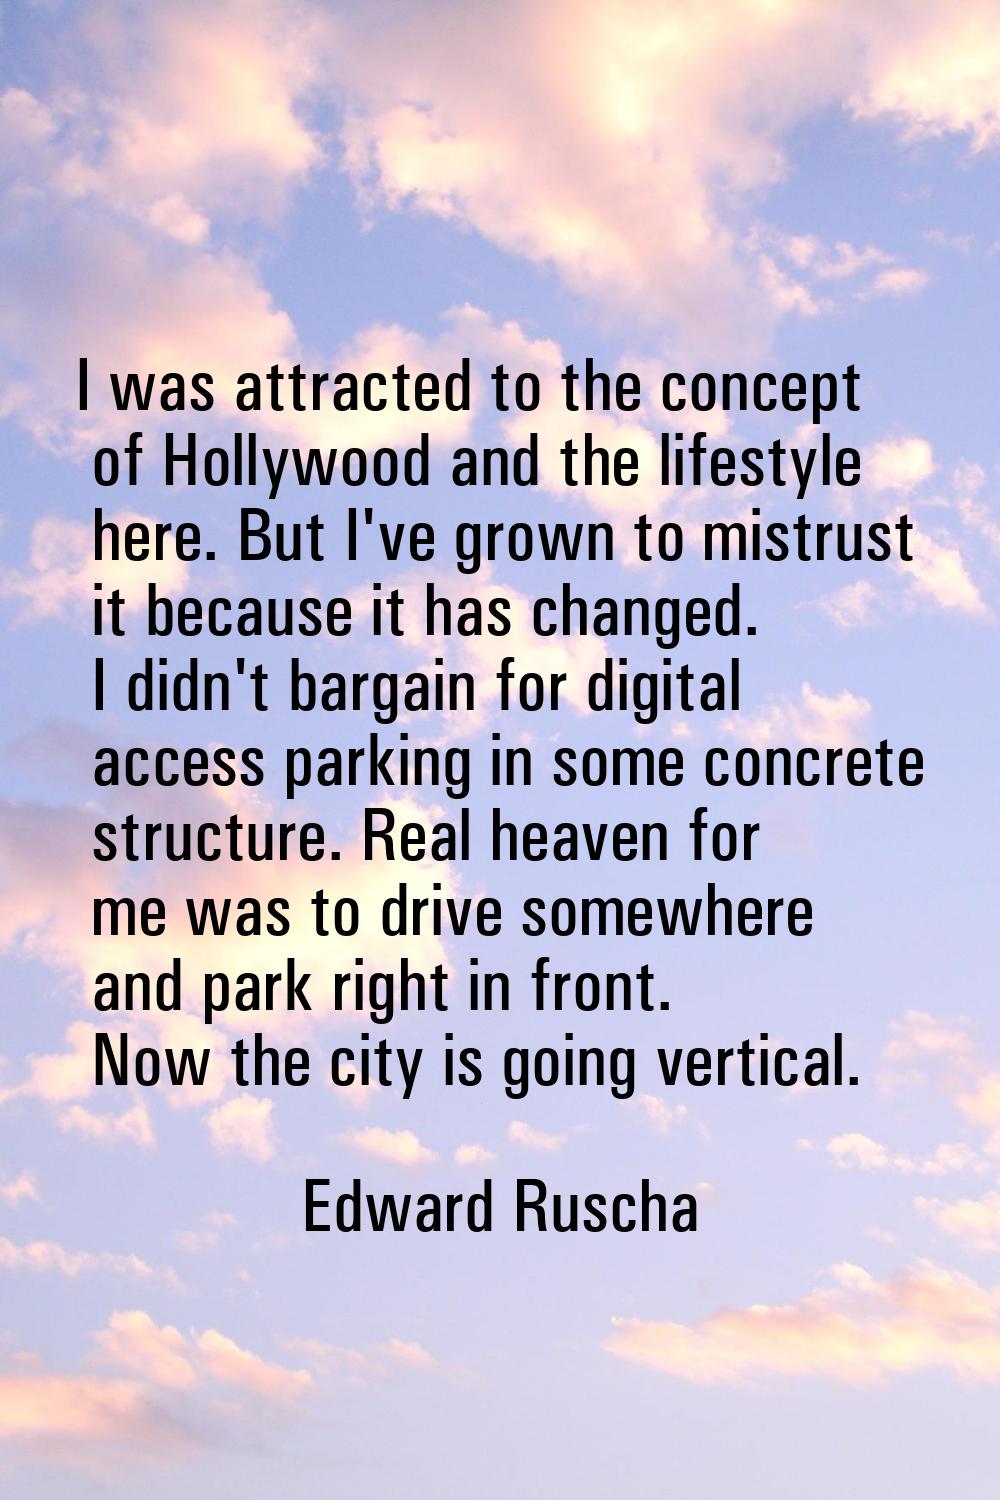 I was attracted to the concept of Hollywood and the lifestyle here. But I've grown to mistrust it b